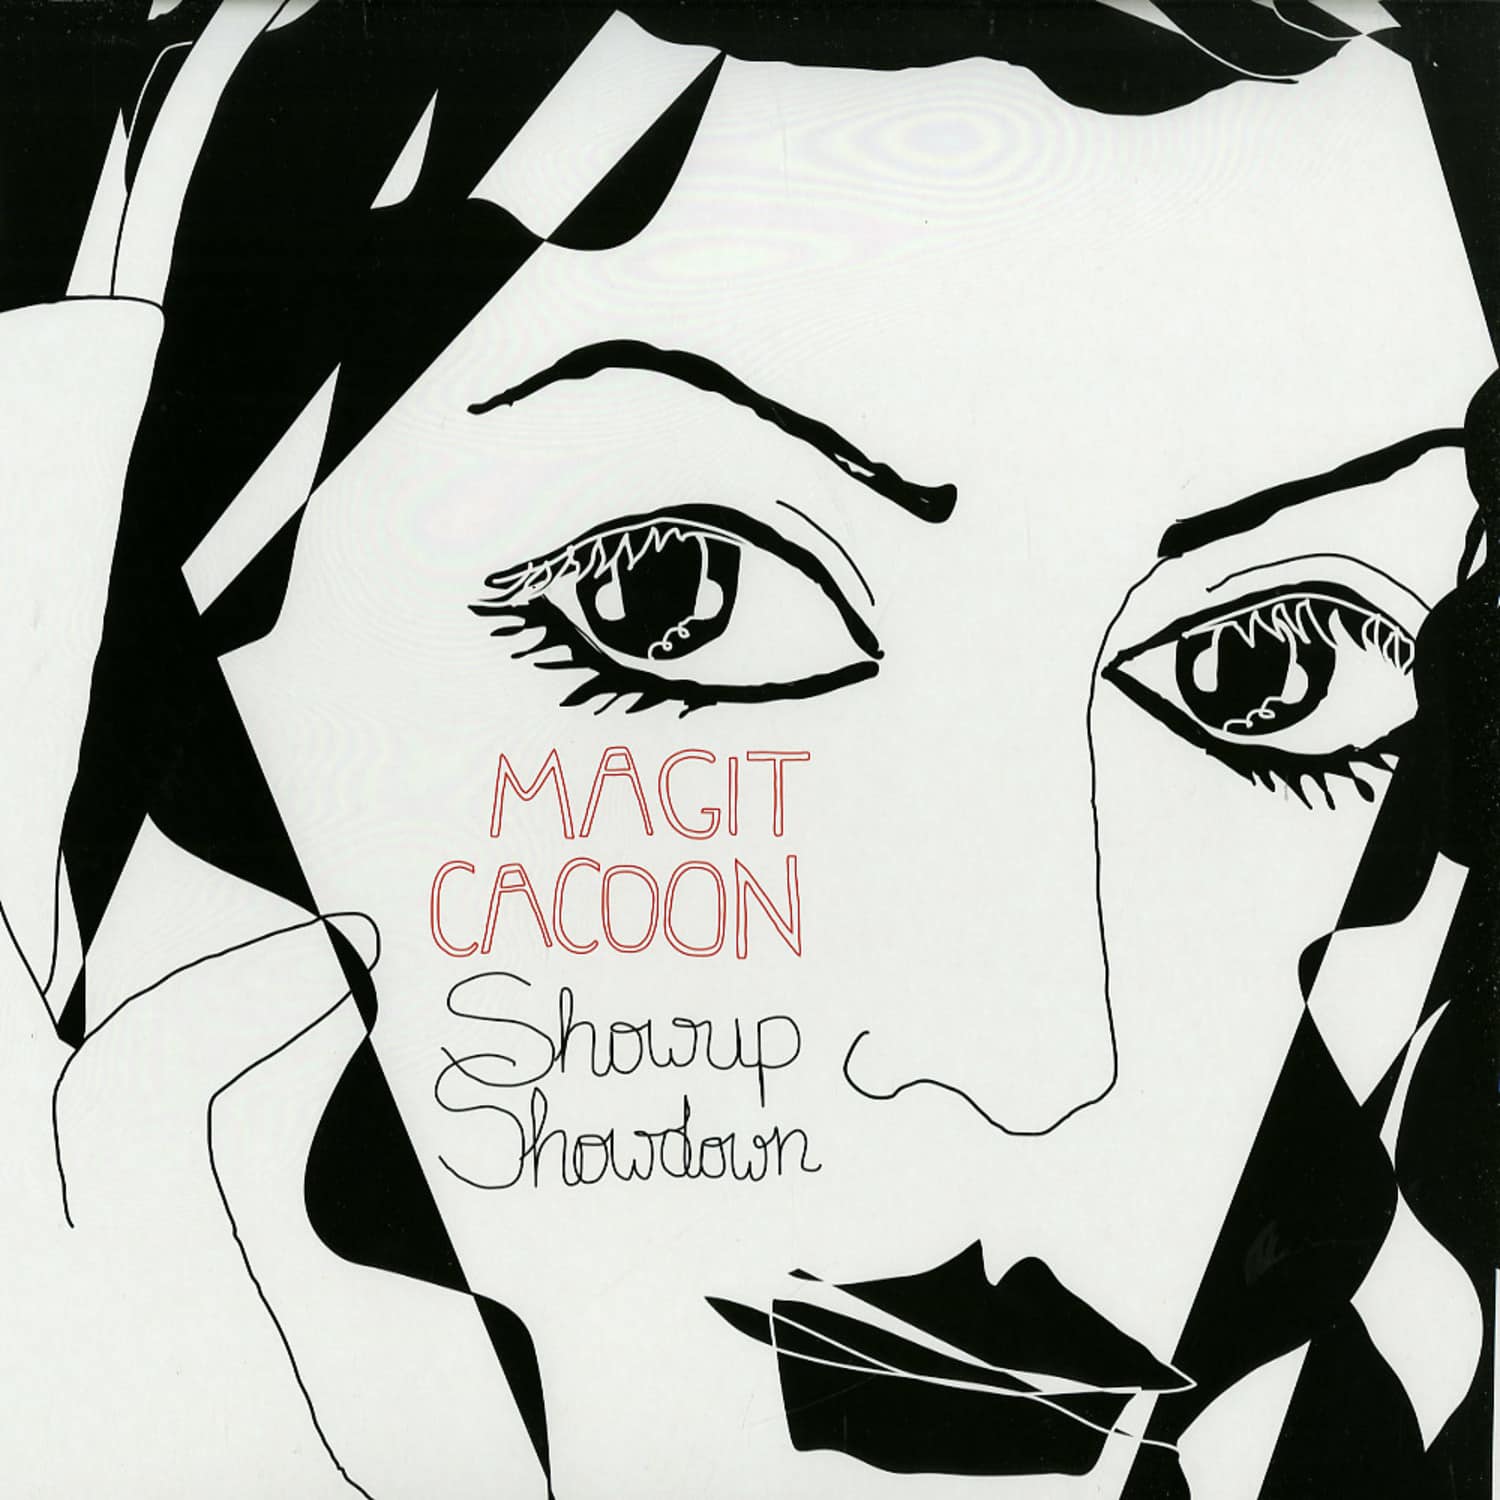 Magit Cacoon - SHOW UP SHOW DOWN 